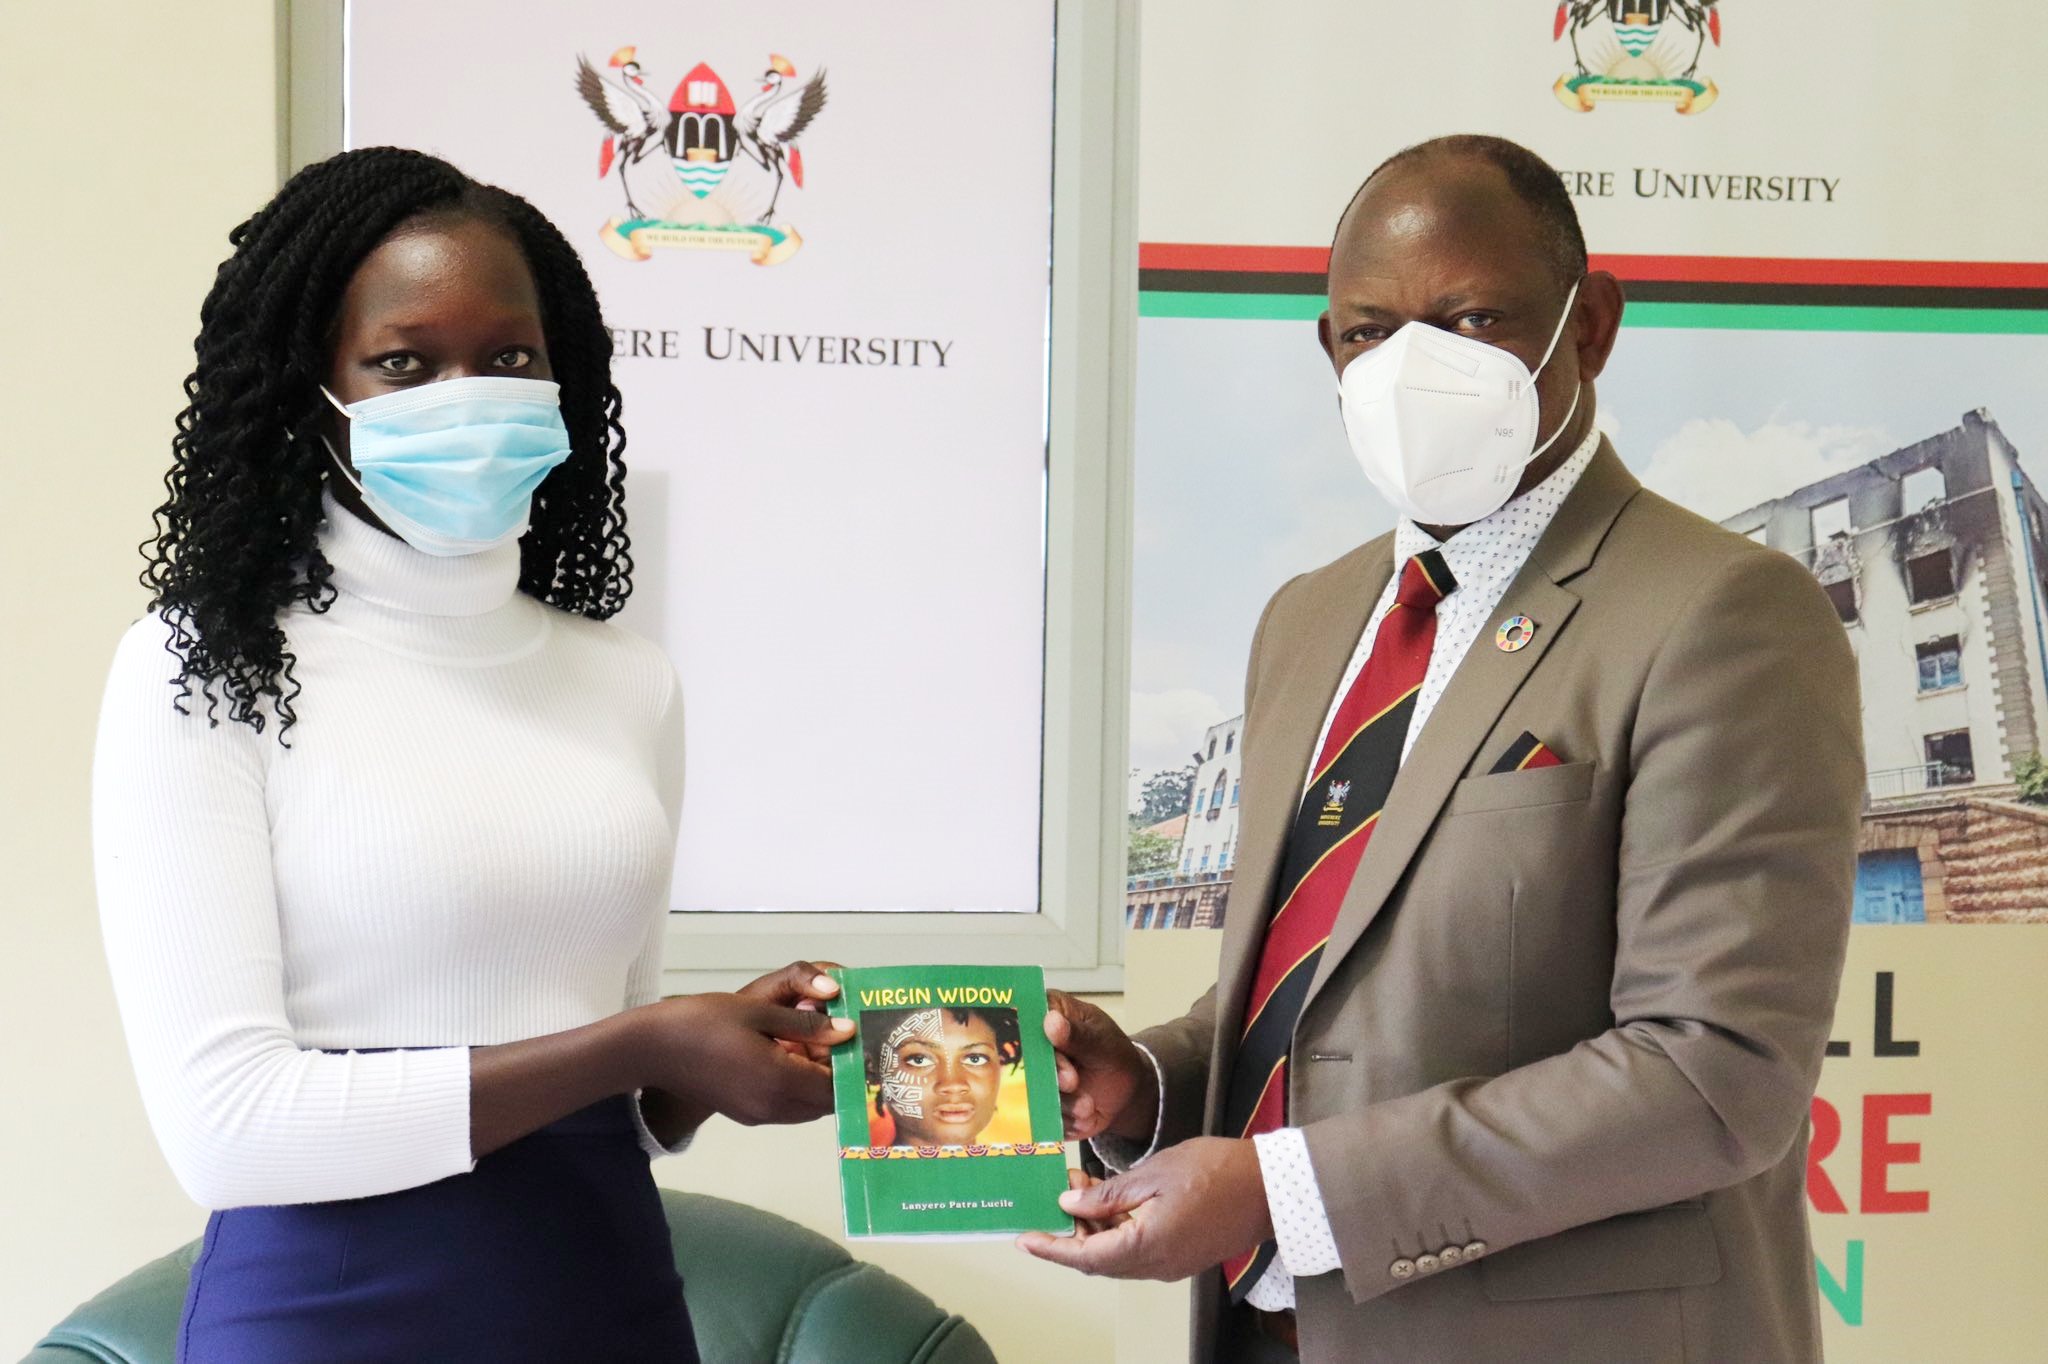 The Vice Chancellor, Prof. Barnabas Nawangwe (R) receives a copy of the book "Virgin Widow" from the author, Makerere University Student, Miss Lanyero Patra Lucile (L) on 13th April 2021, CTF1.